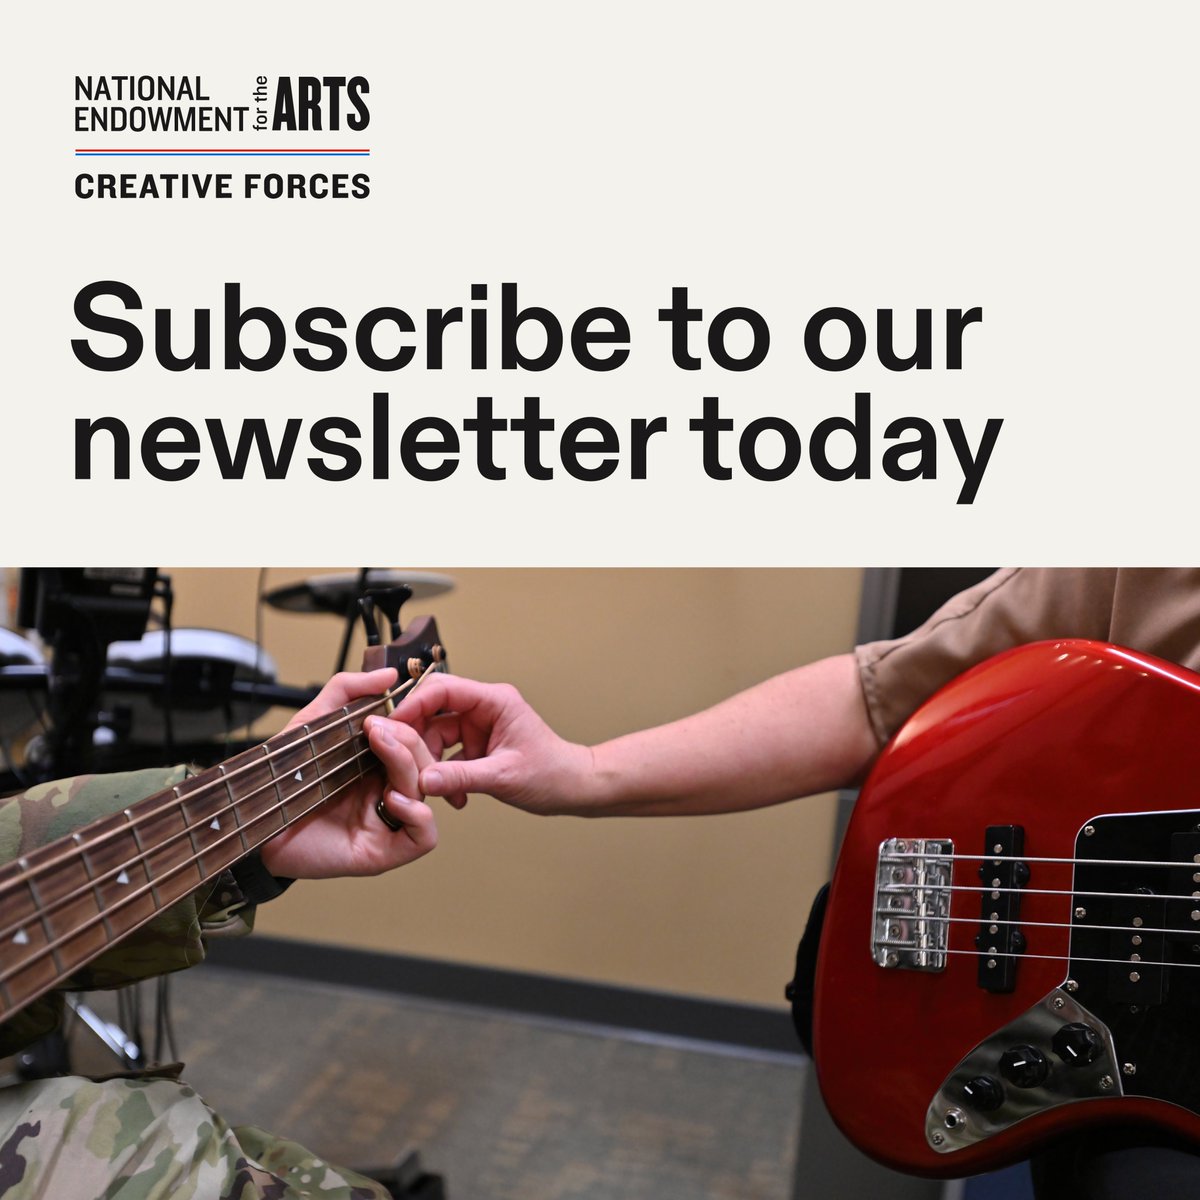 Have you signed up for the Creative Forces newsletter yet?

Subscribe and receive the latest news and updates from our clinical team’s #CreativeArtsTherapies work, our #CommunityEngagement Grant program, and our research activities: creativeforcesnrc.arts.gov/subscribe/
#ArtsInHealth #MilFam